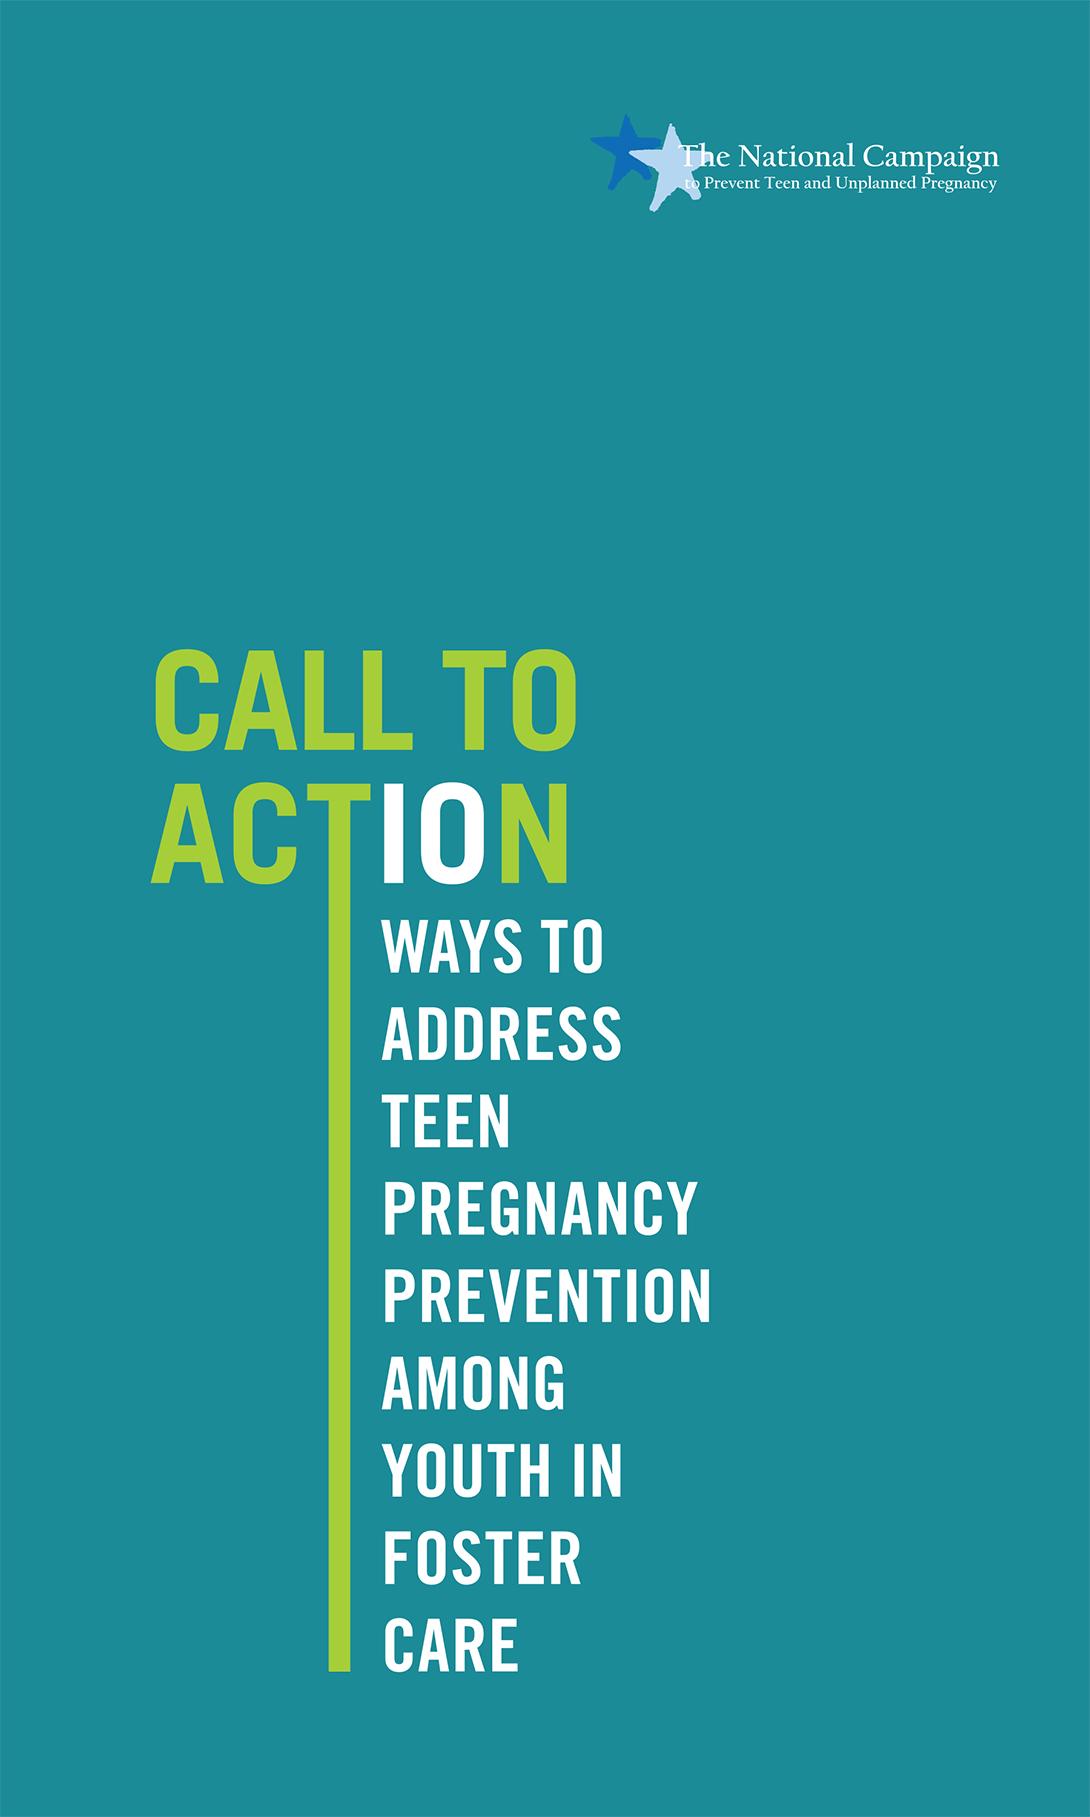 Call to Action: 10 Ways to Address Teen Pregnancy Prevention Among Youth in Foster Care